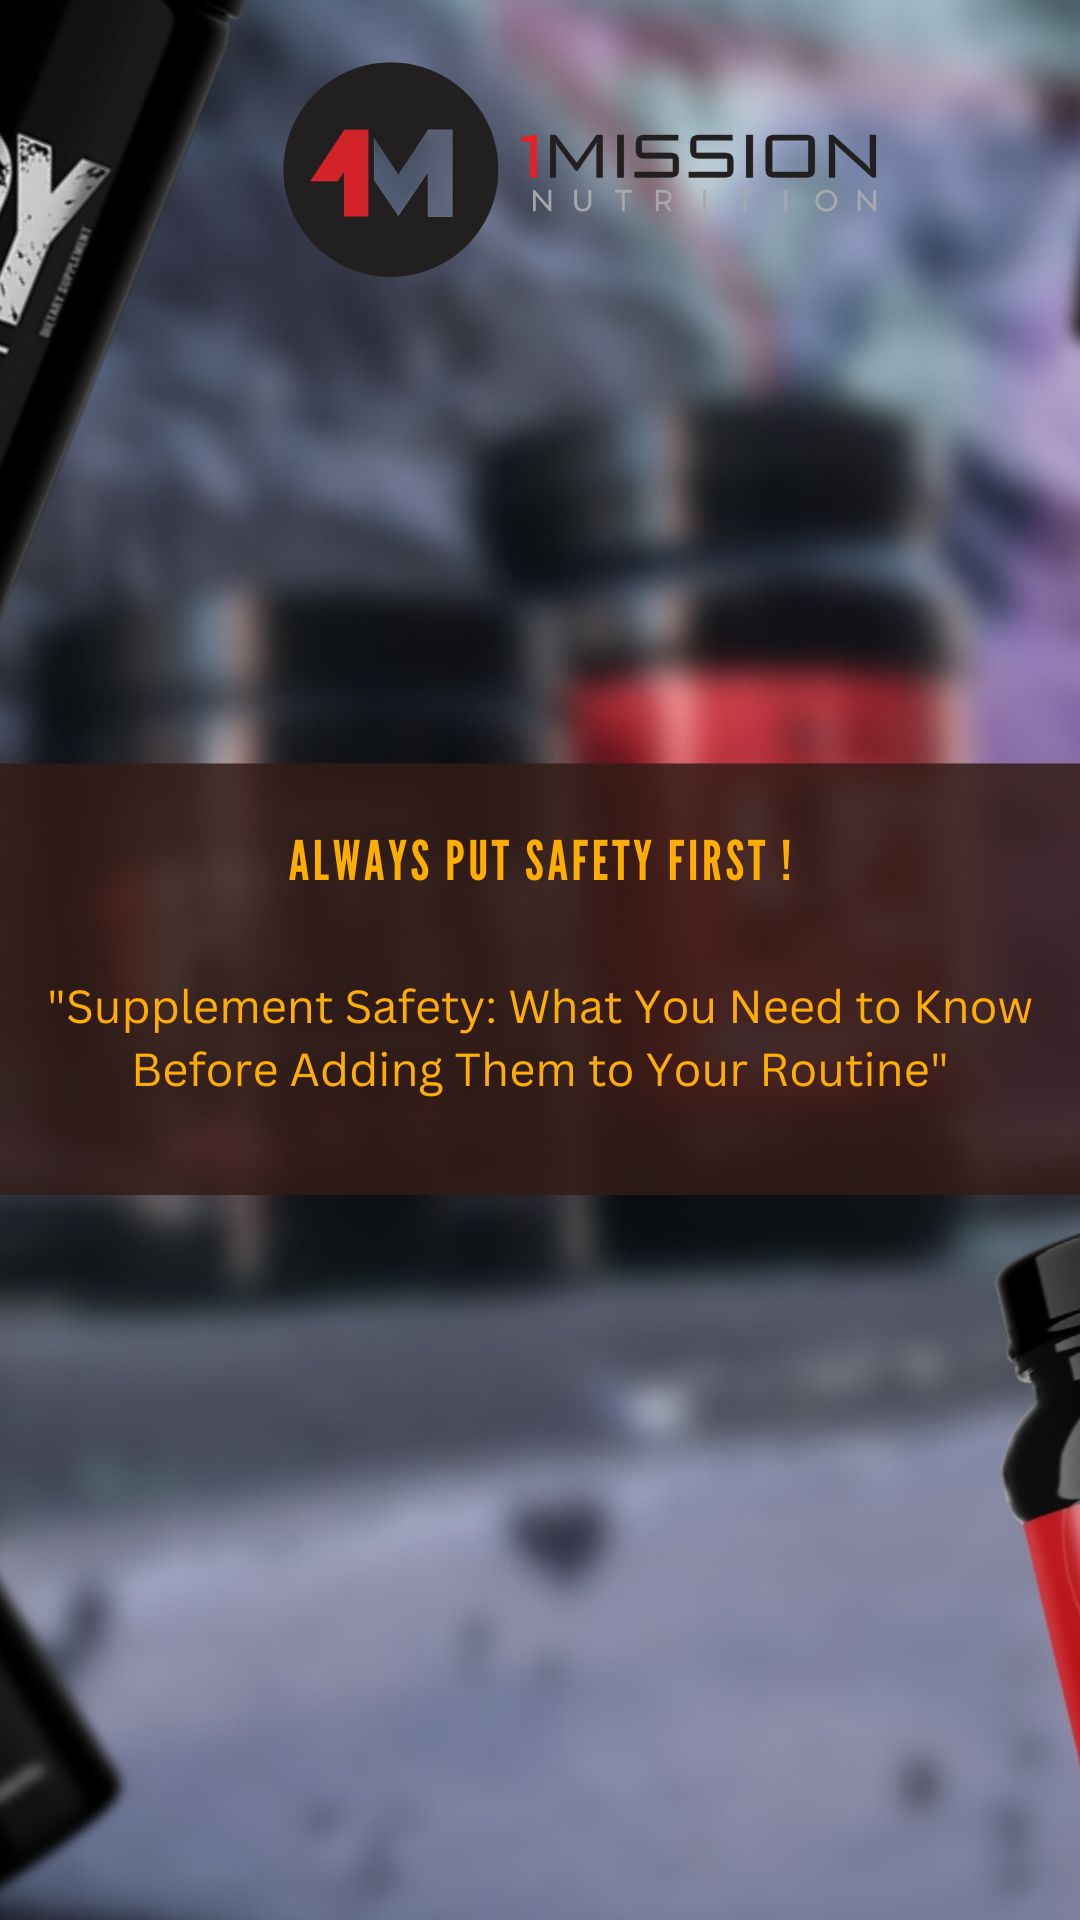 Supplement Safety: What You Need to Know Before Adding Them to Your Routine